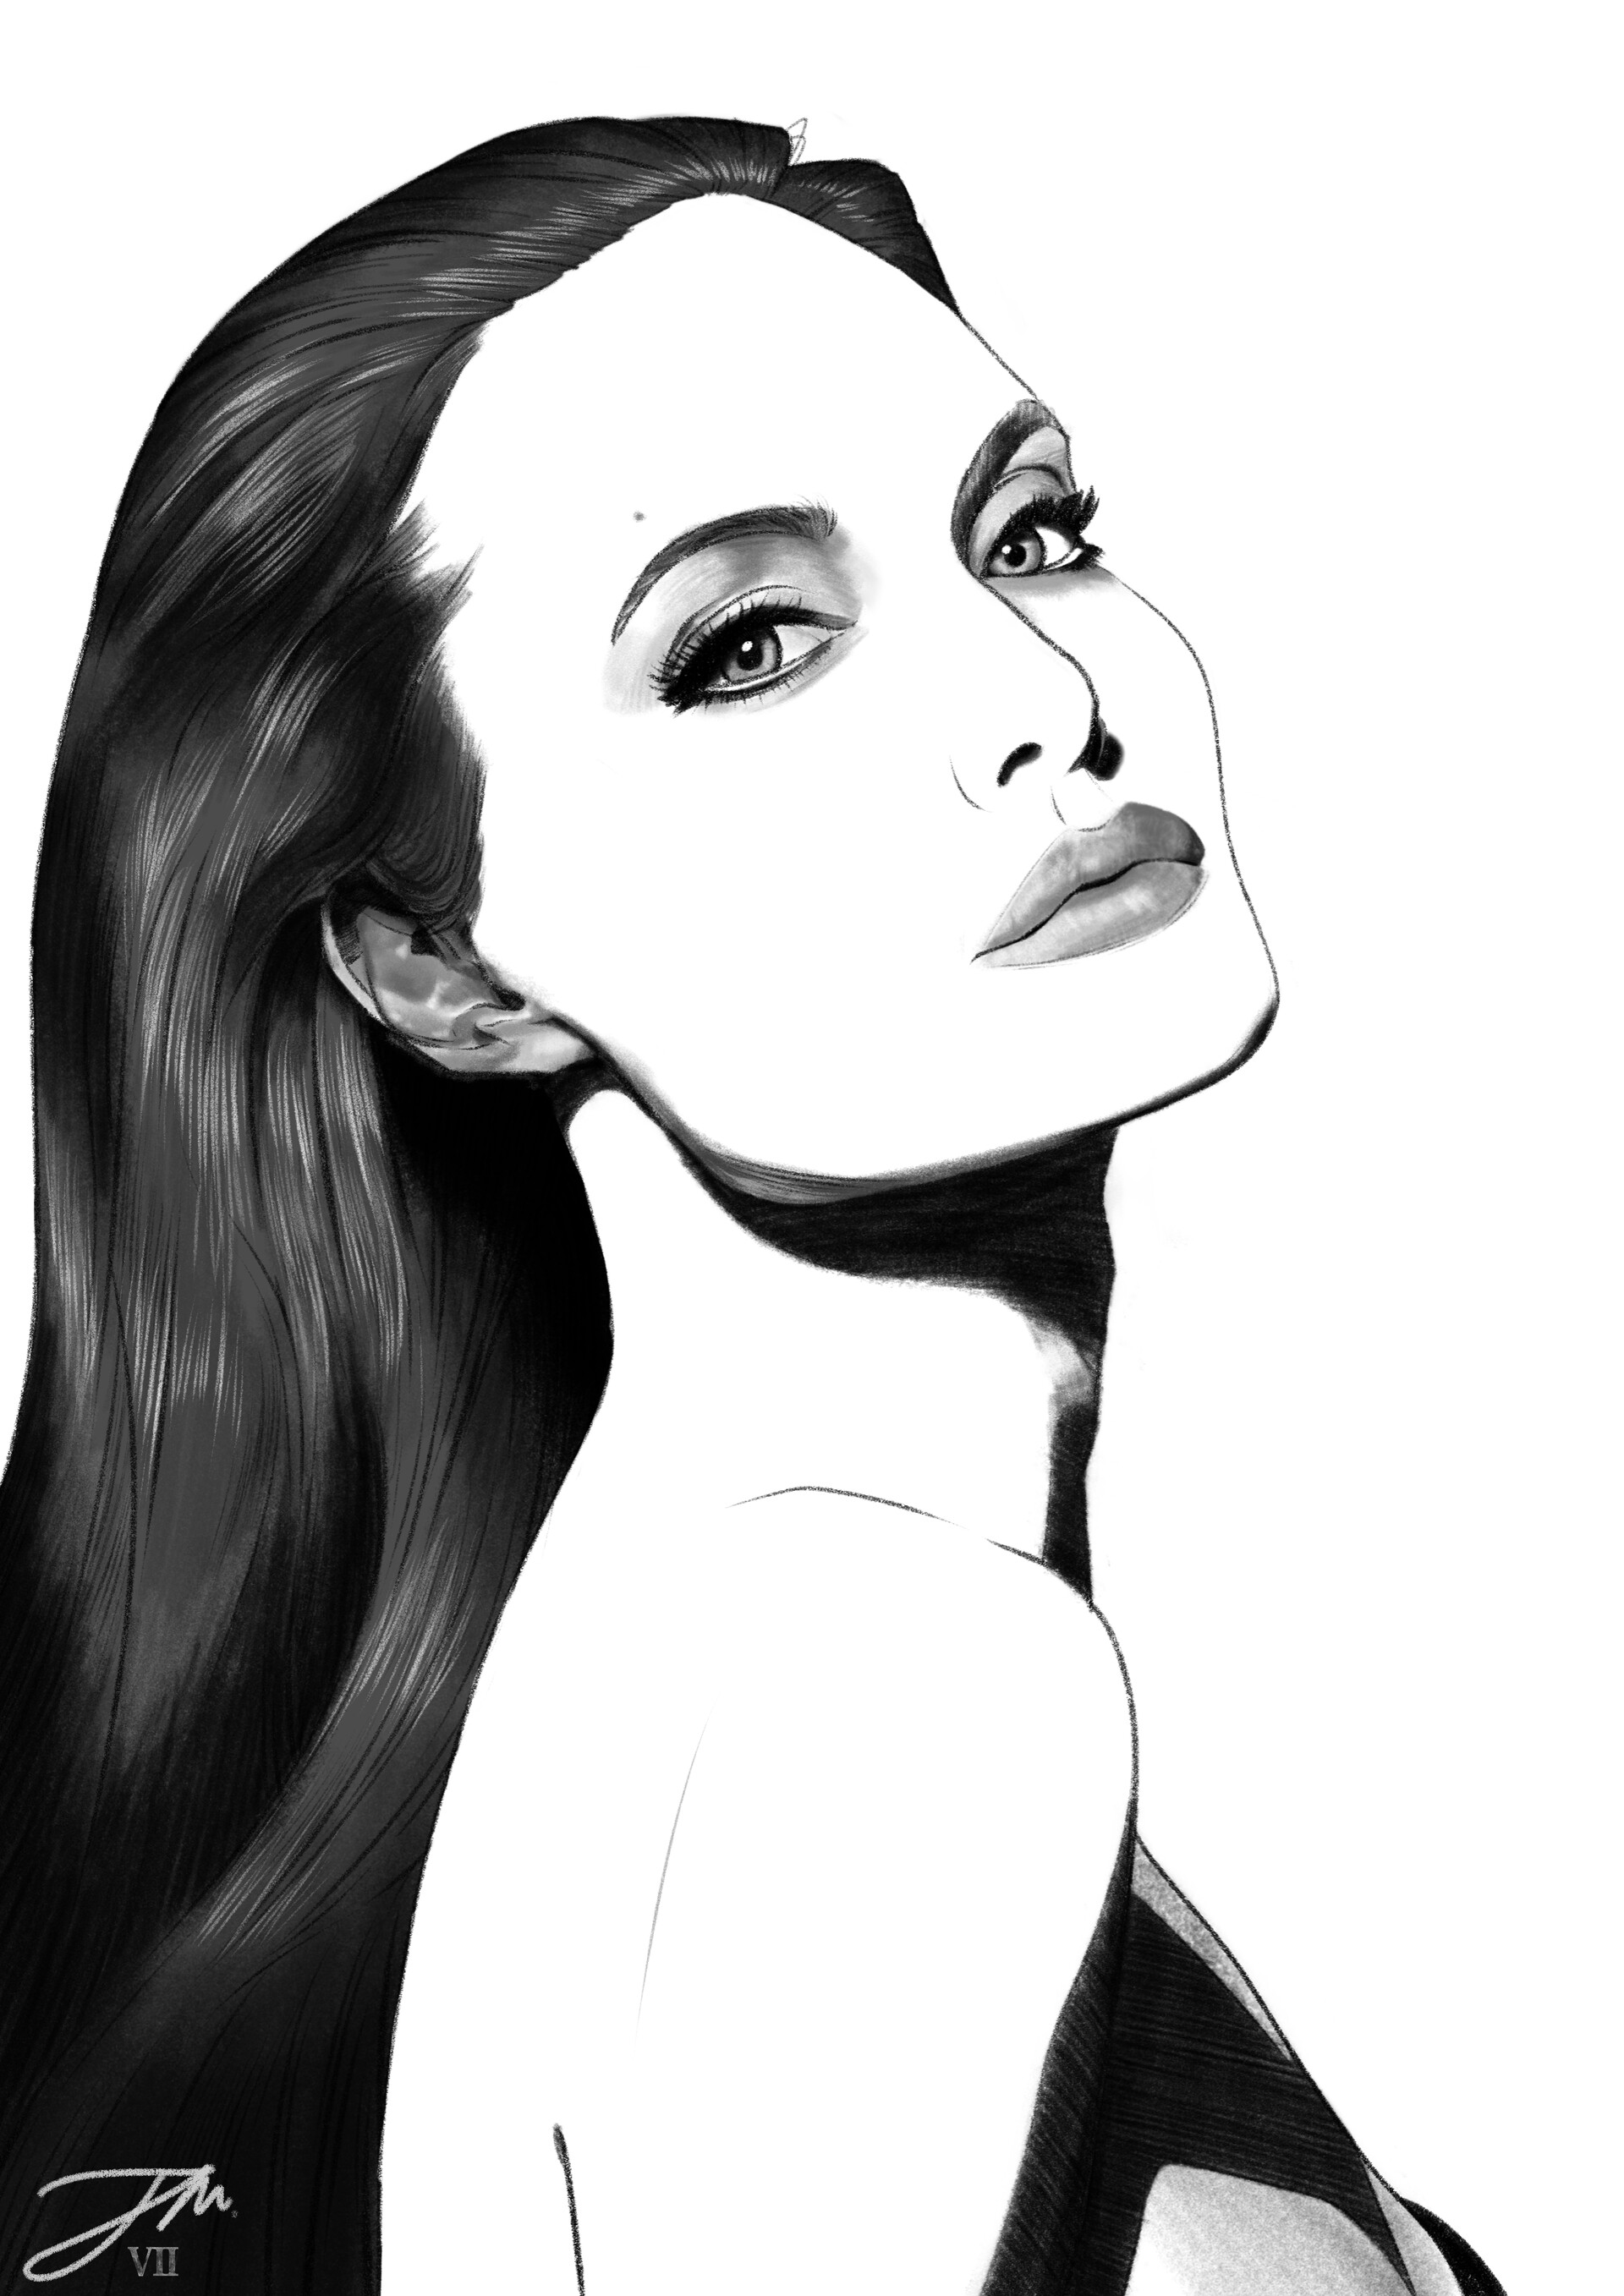 My pencil drawing of Angelina Jolie by AlexArt1994 on DeviantArt